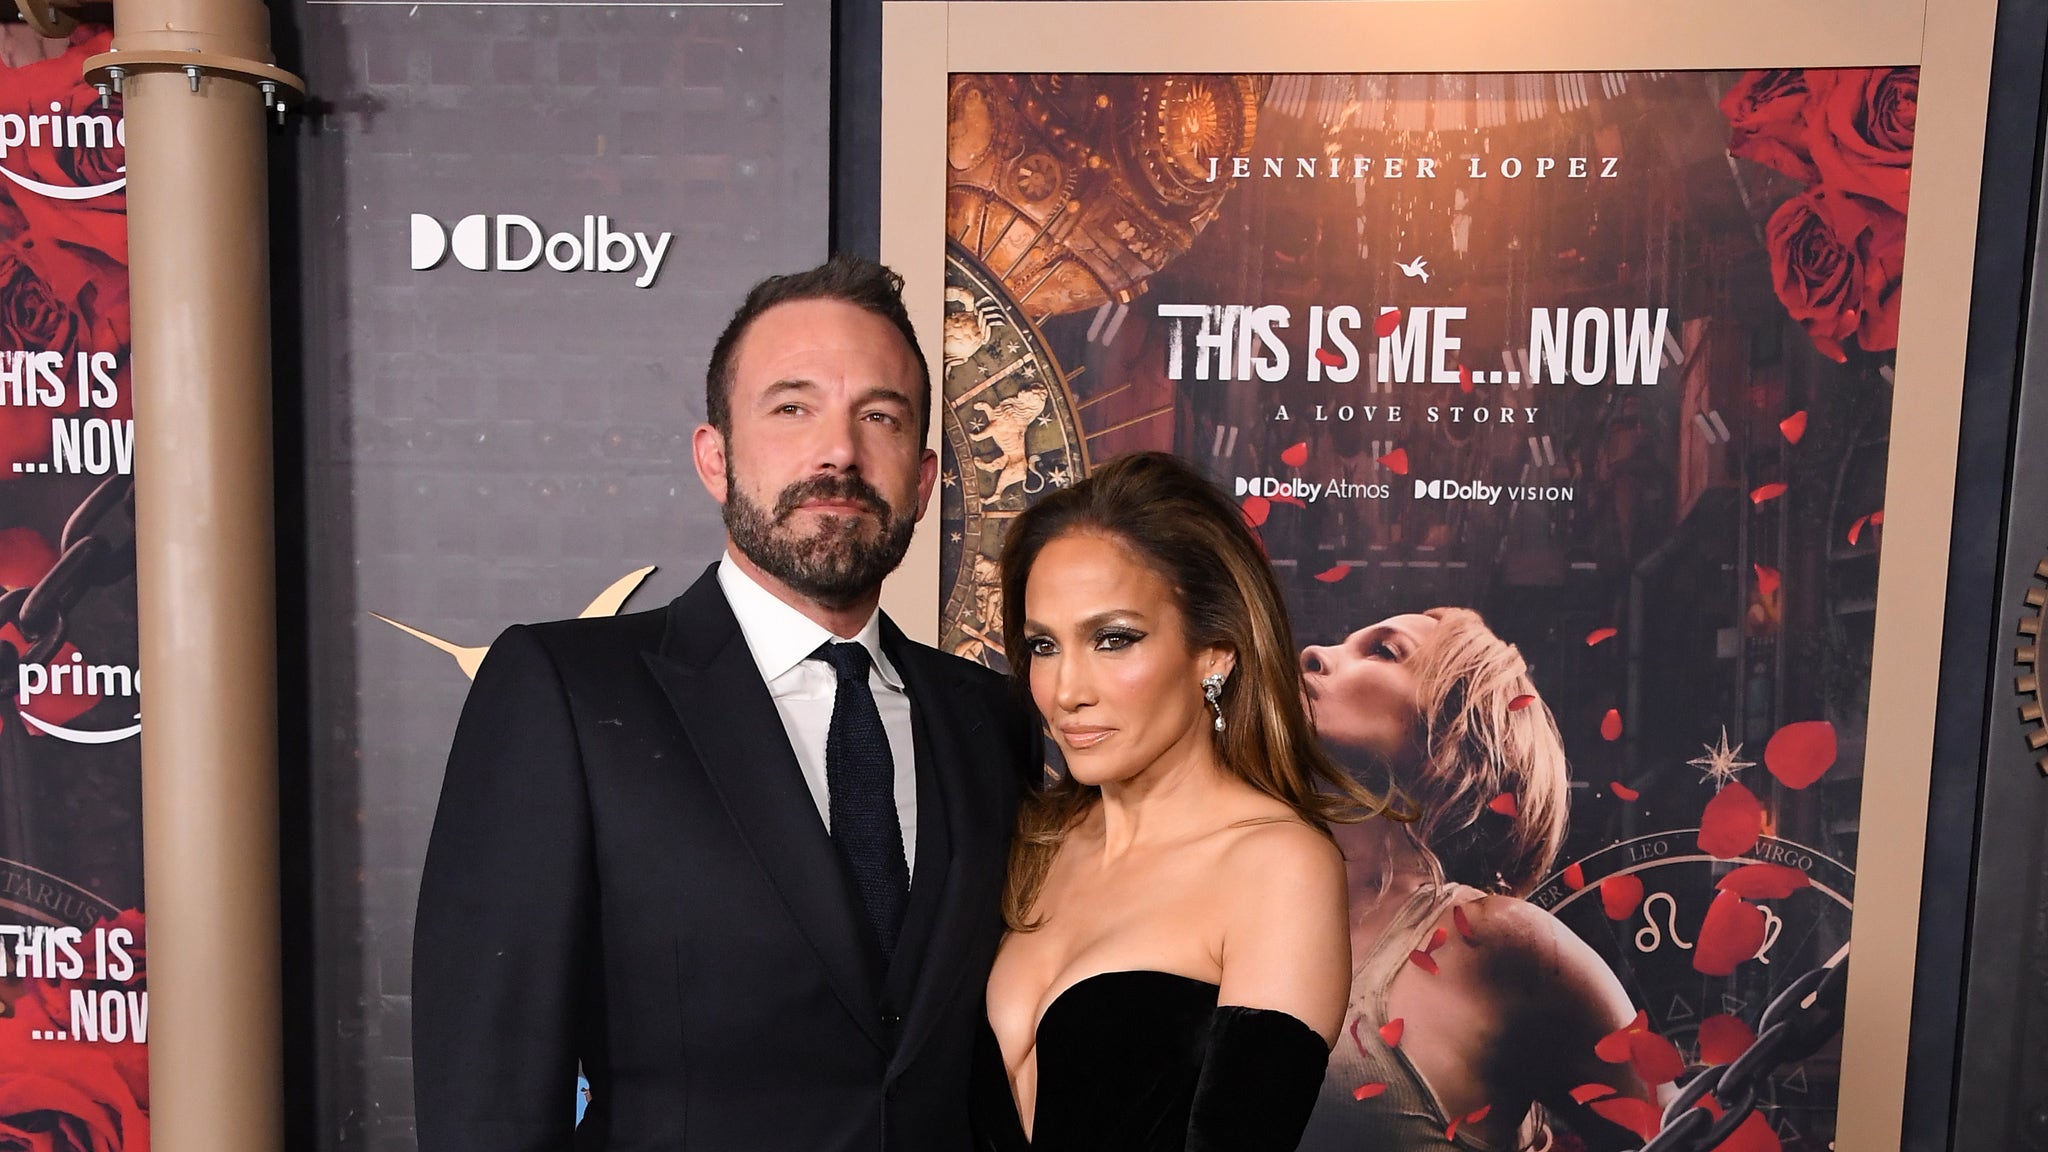 Jennifer Lopez & Ben Affleck Hit Red Carpet of This Is Me ... Now: A Love Story Premiere